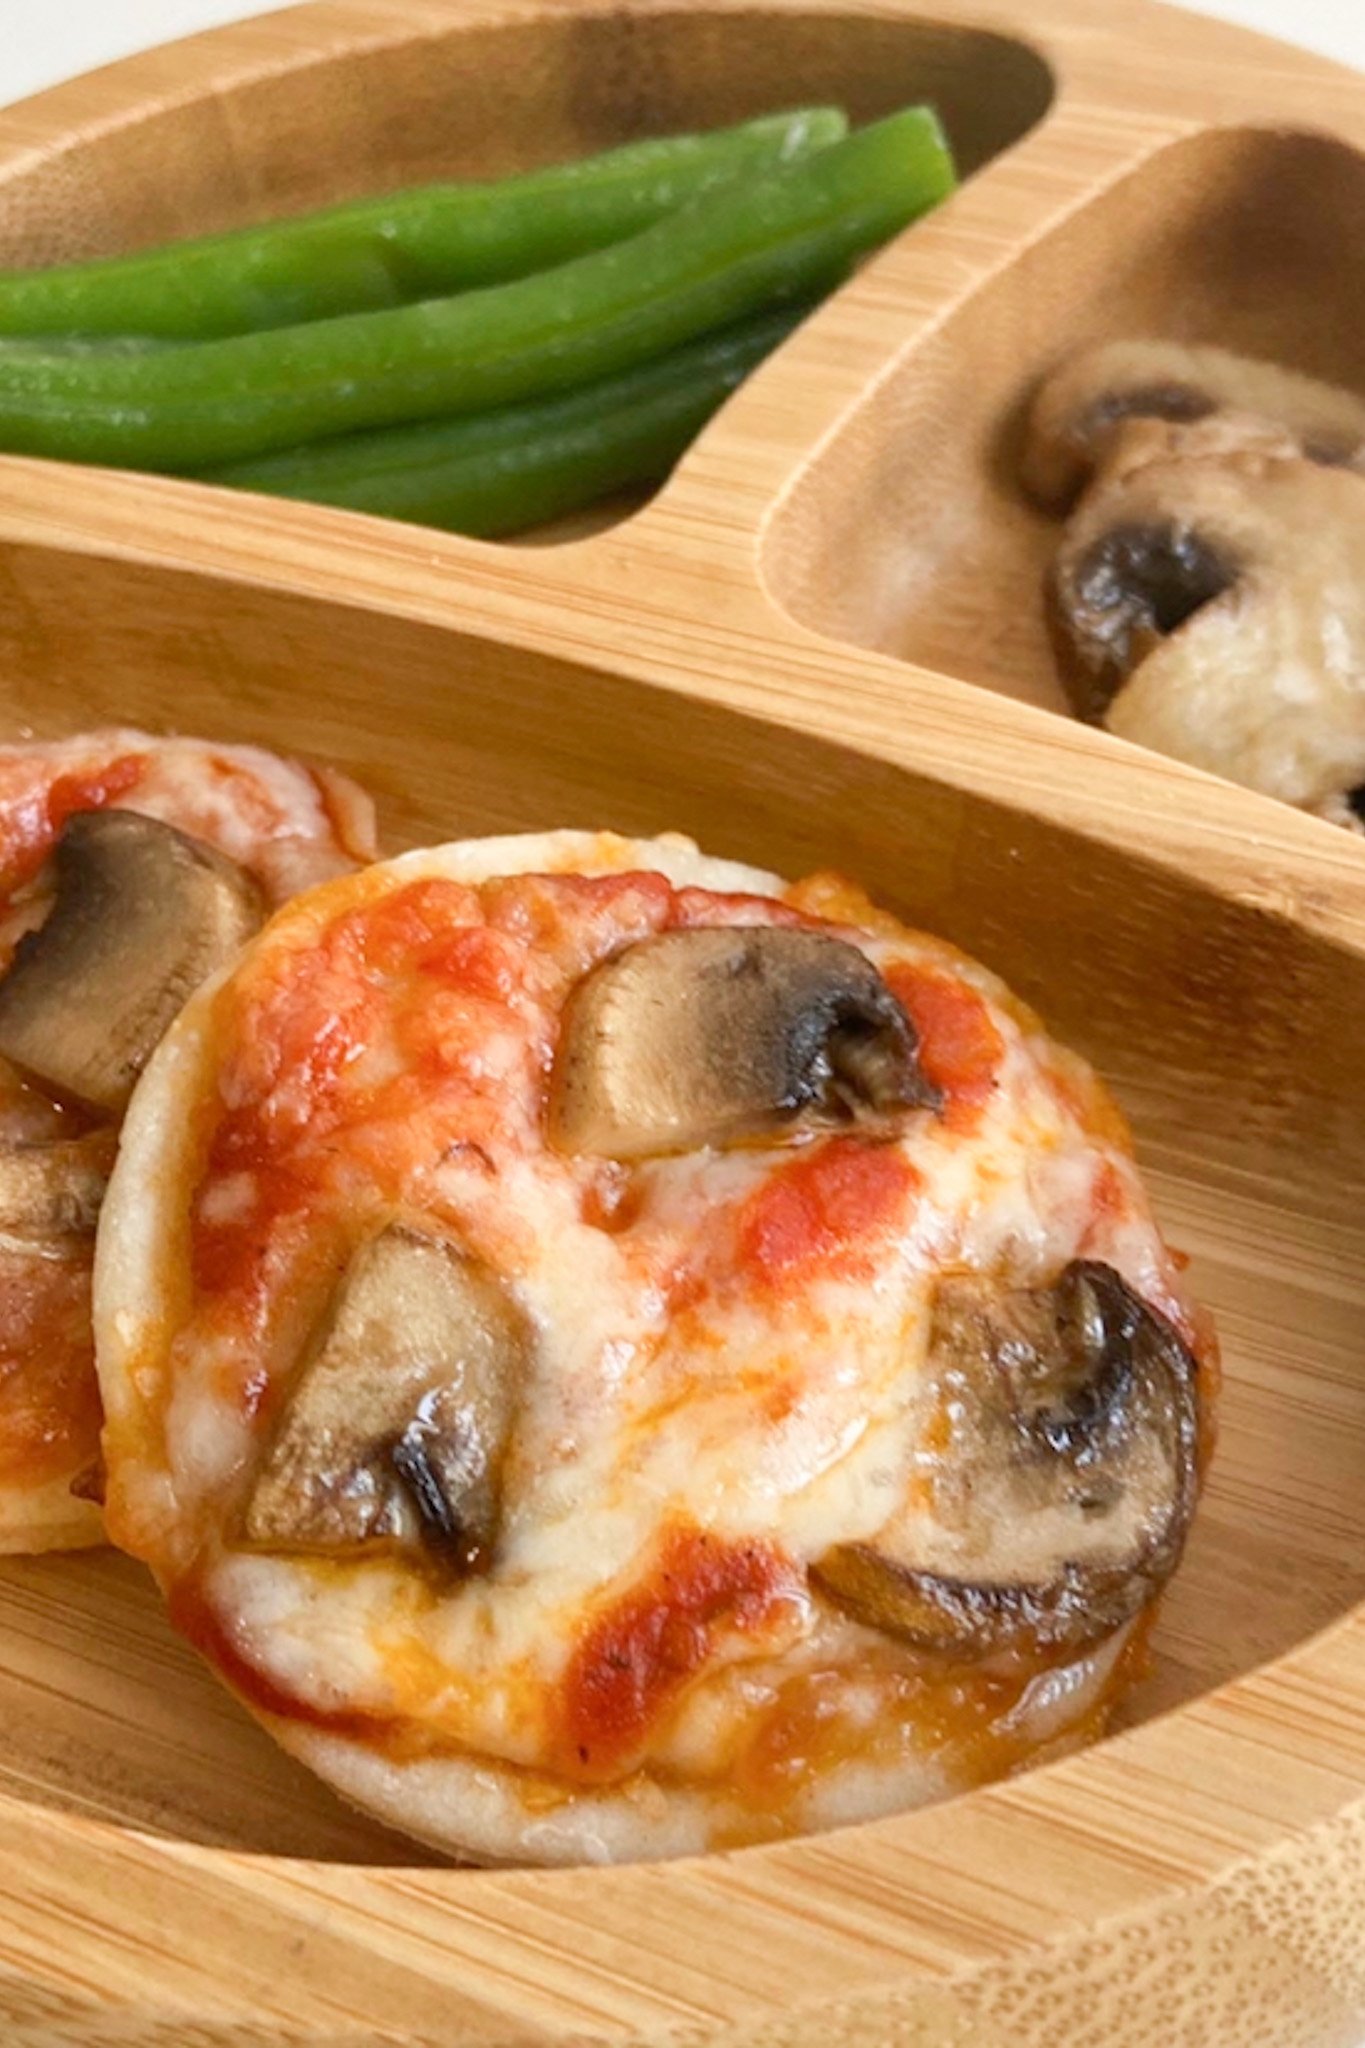 Mini pizzas topped with mushrooms and served with green means and sautéed mushrooms.